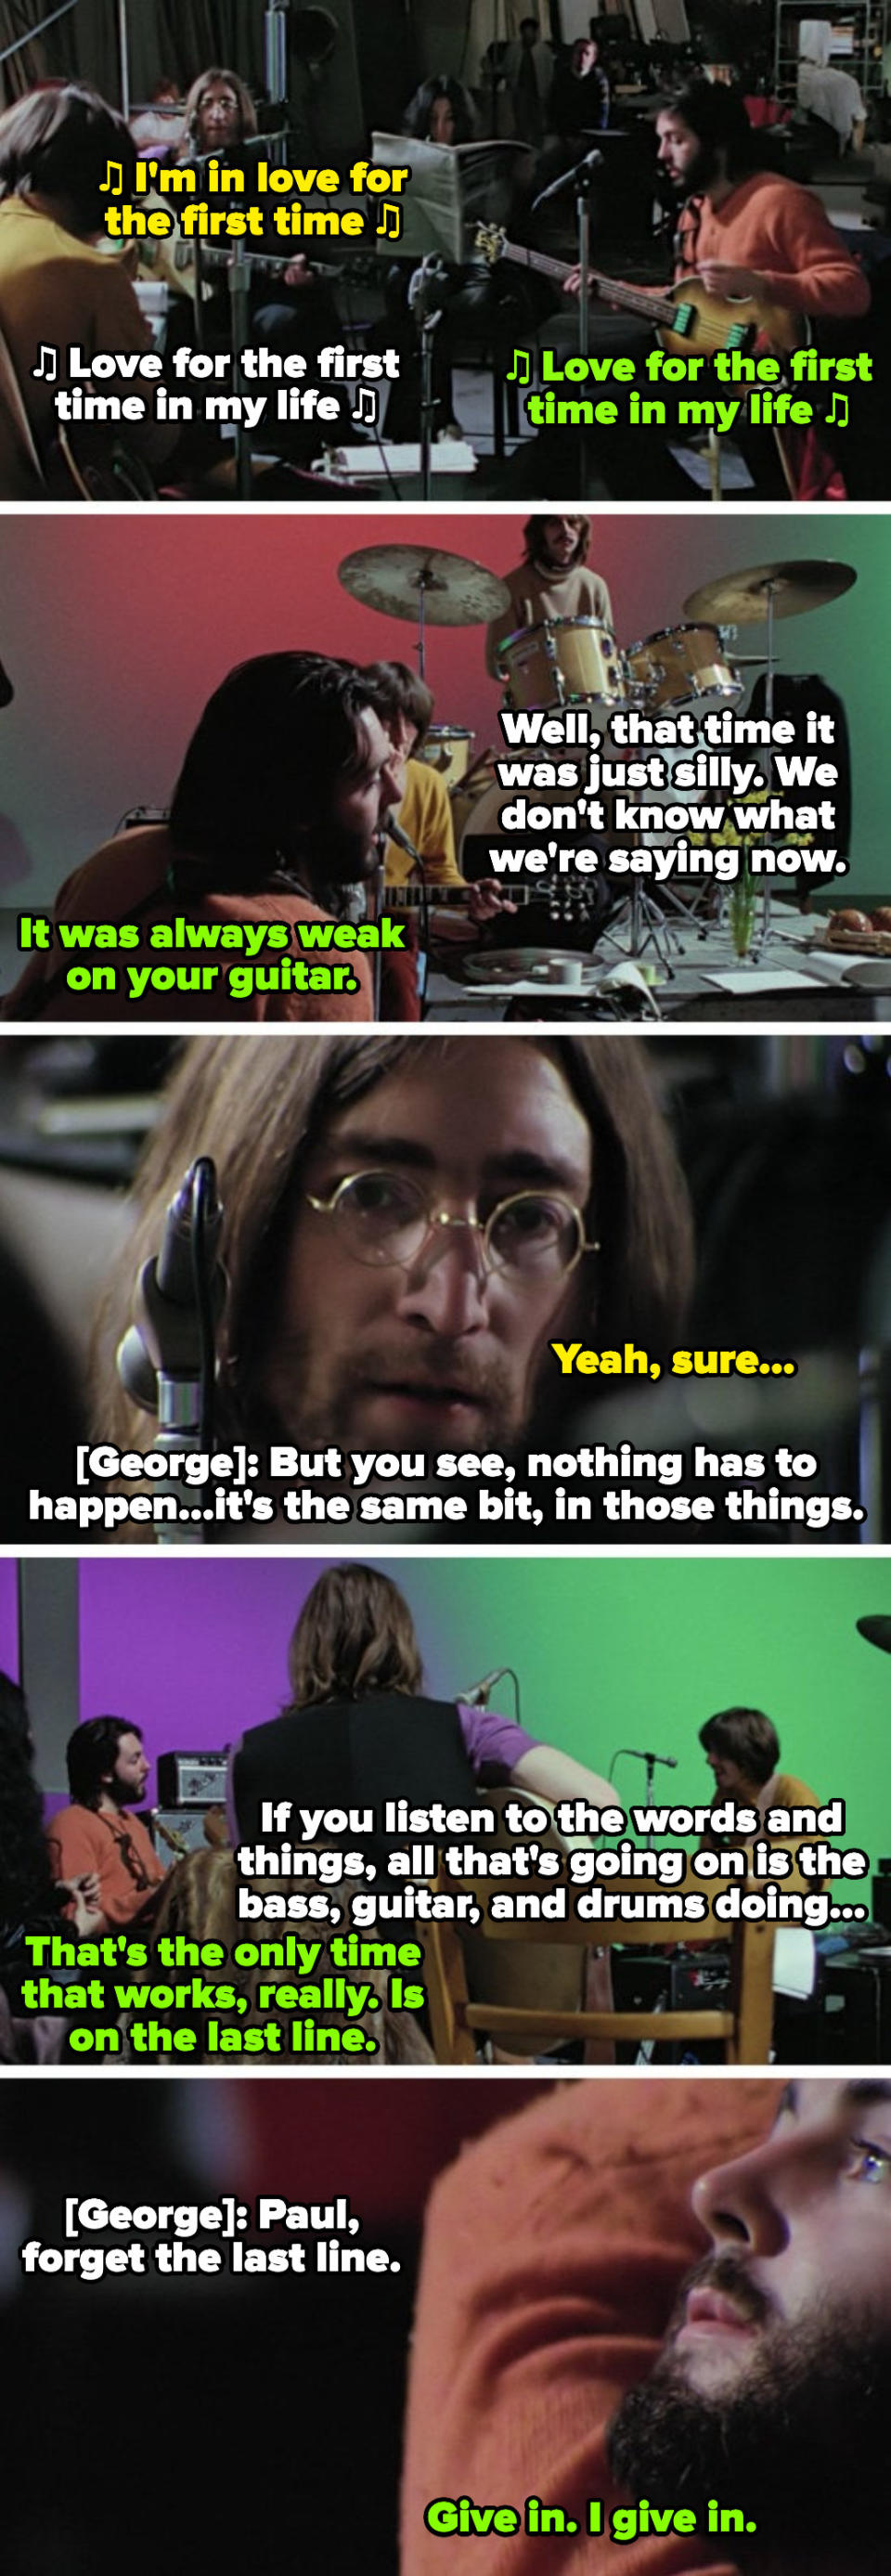 Paul to John: "It was always weak on your guitar" John to Paul: "Yeah, sure..." George to Paul: "If you listen to the words, all that's going on is the bass, guitar, and drums doing..." Paul to George: "Give in. I give in"